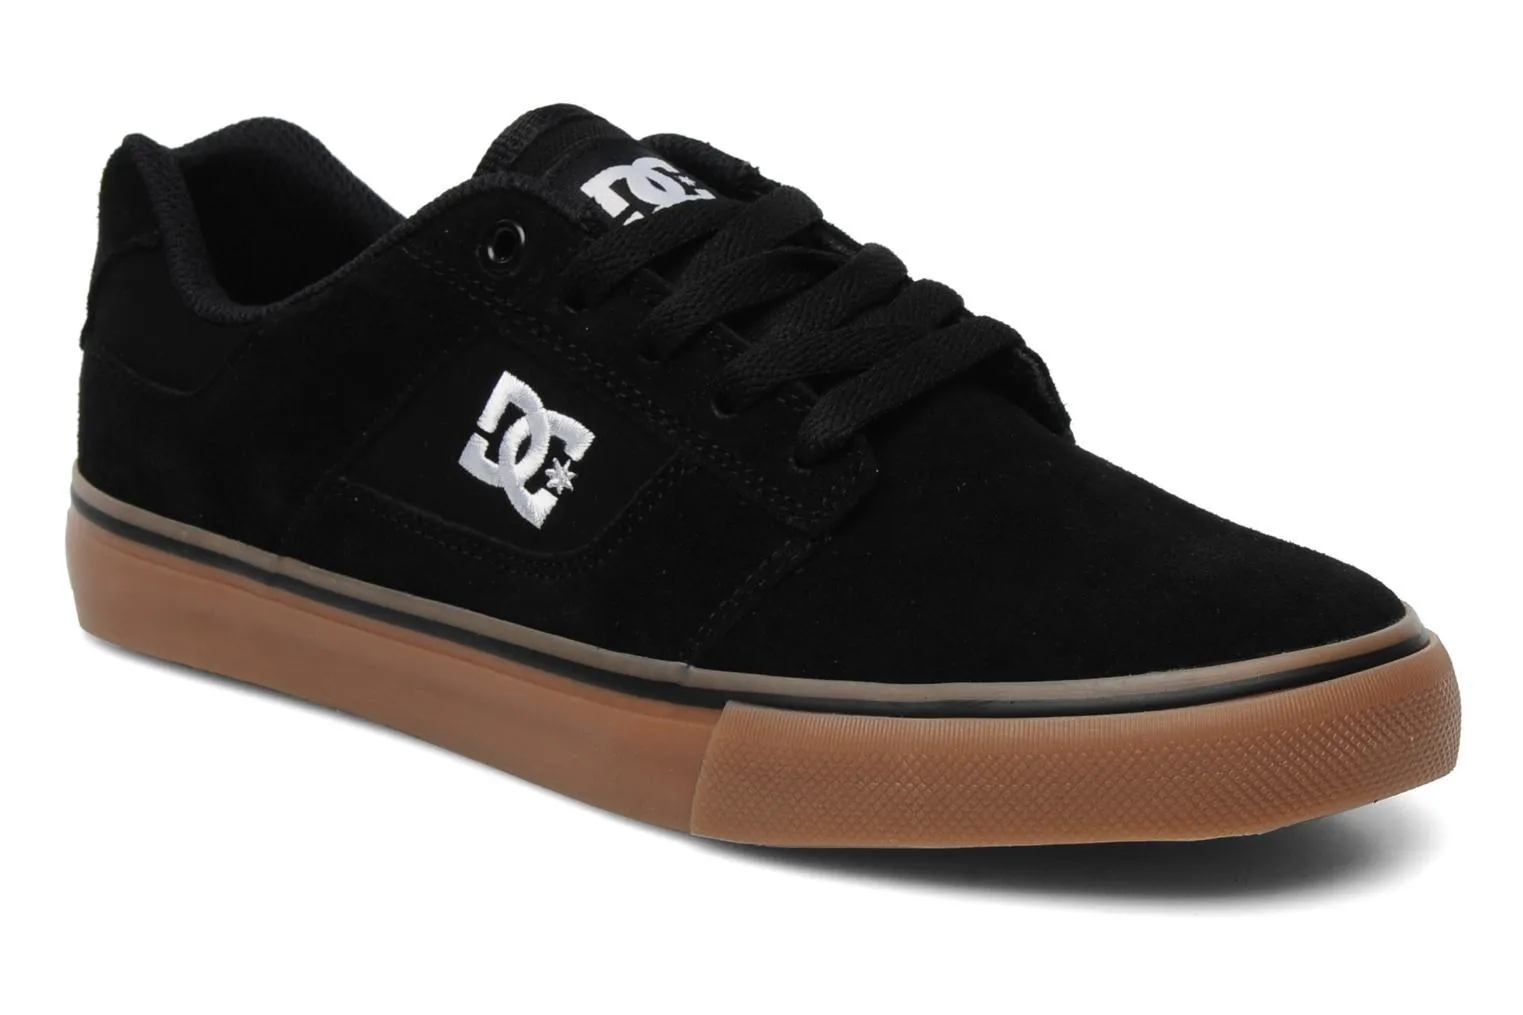 Like or share Inicio Tenis Dc Shoes on Facebook